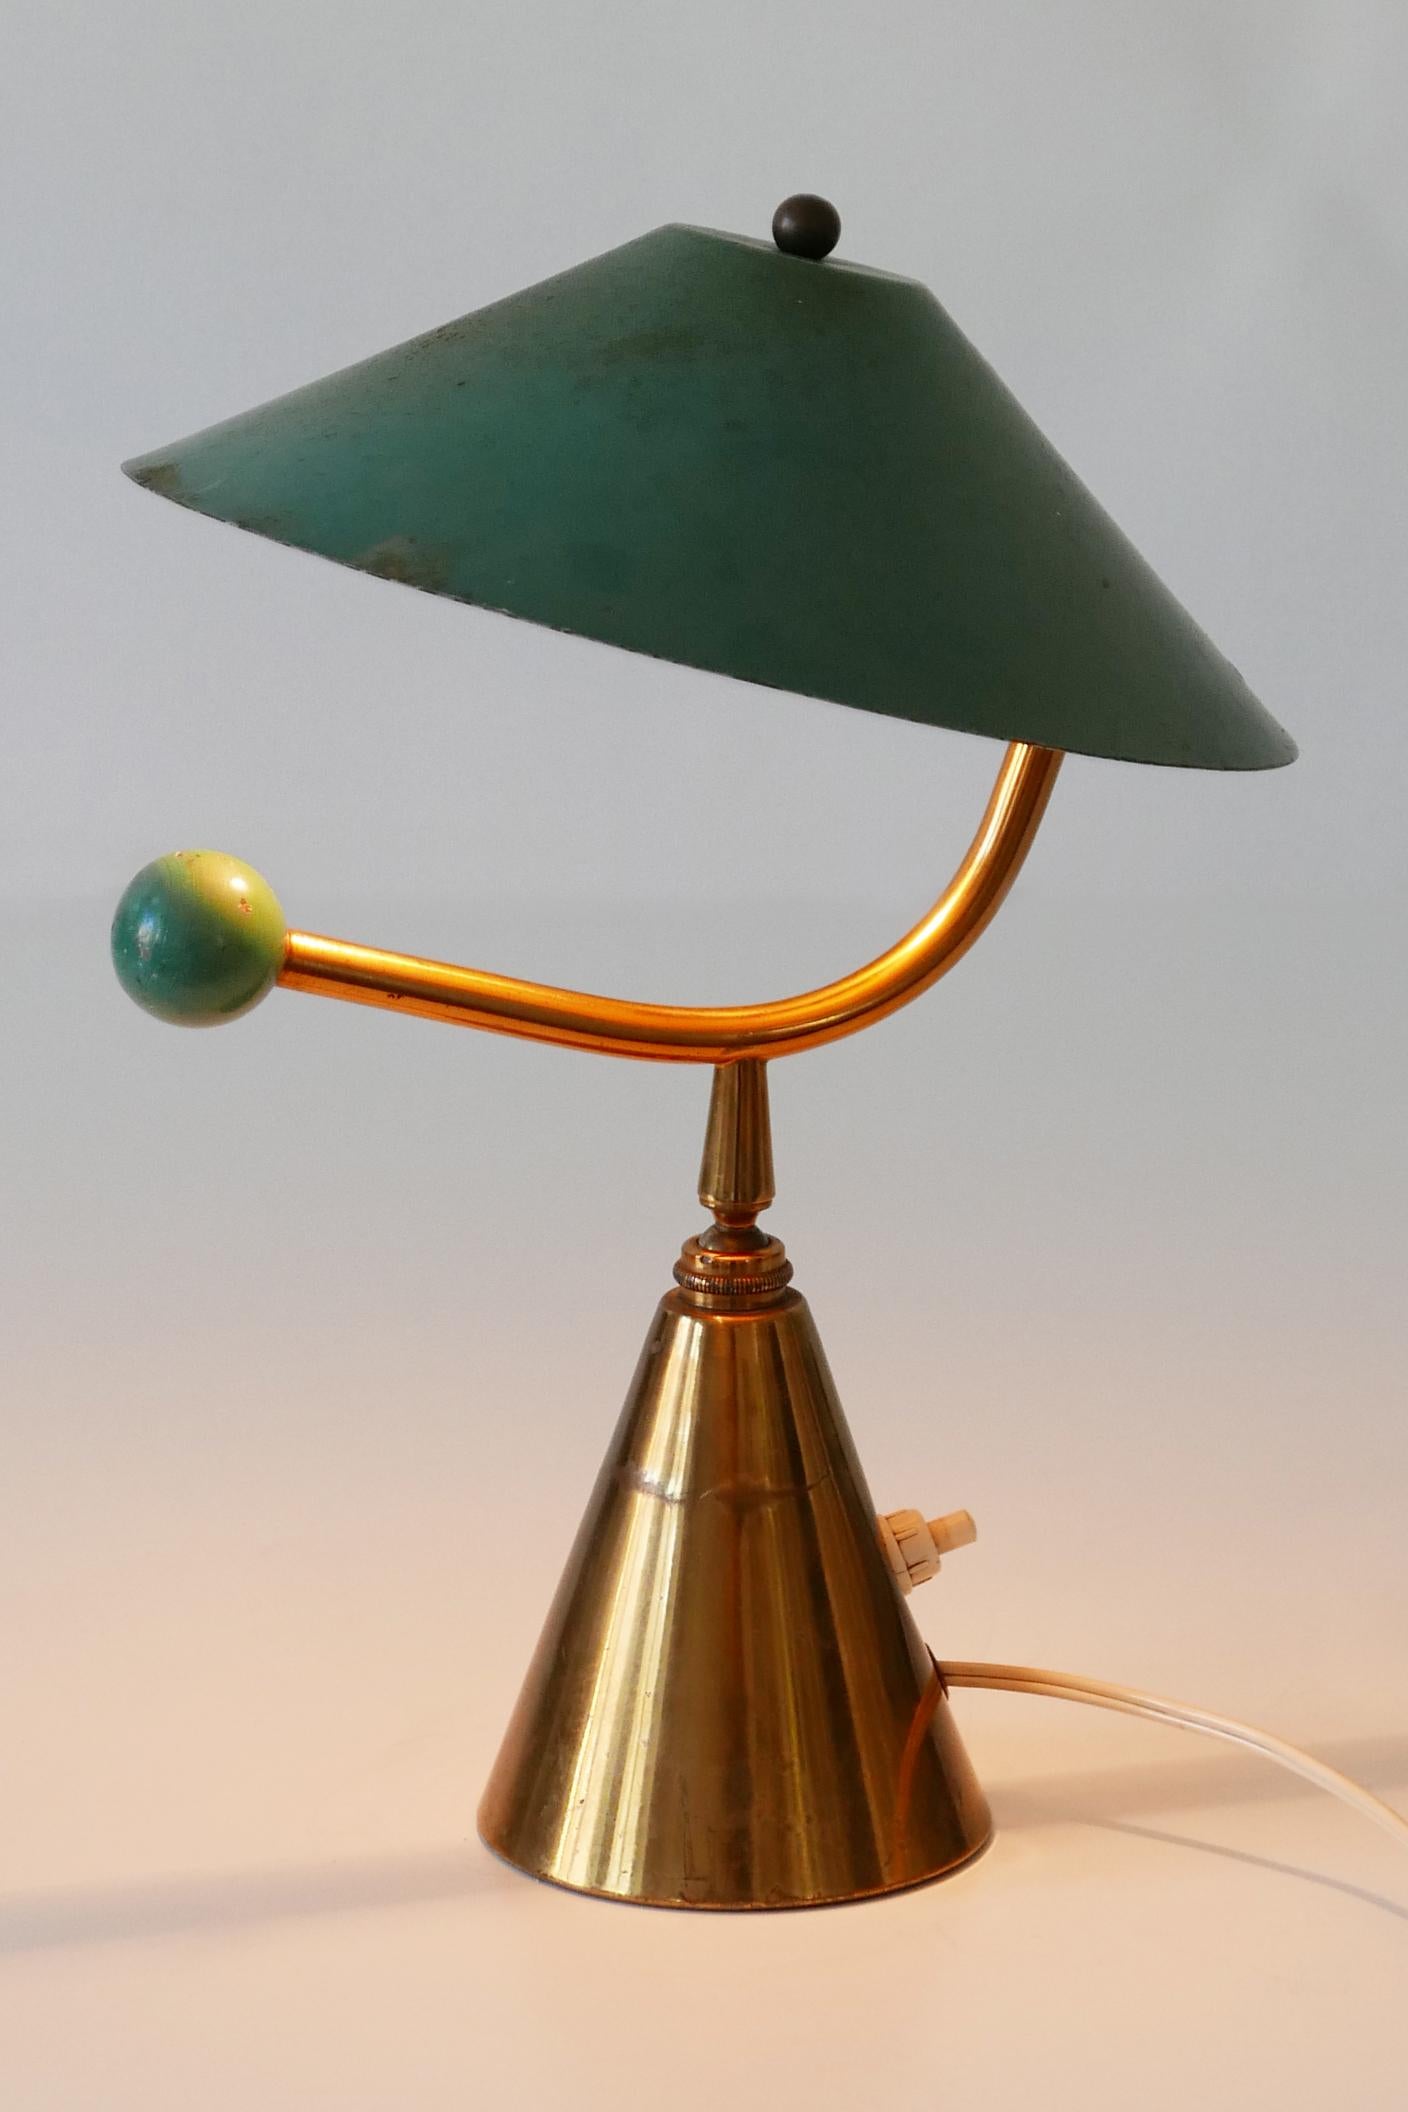 Extremely rare Mid-Century Modern table lamp. Designed and manufactured in 1950s, France. 
Due to the joint ball, the lamp shade is adjustable in various position.

Executed in brass, the lamp needs 1 x B22 bayonet bulb holder, is wired and in